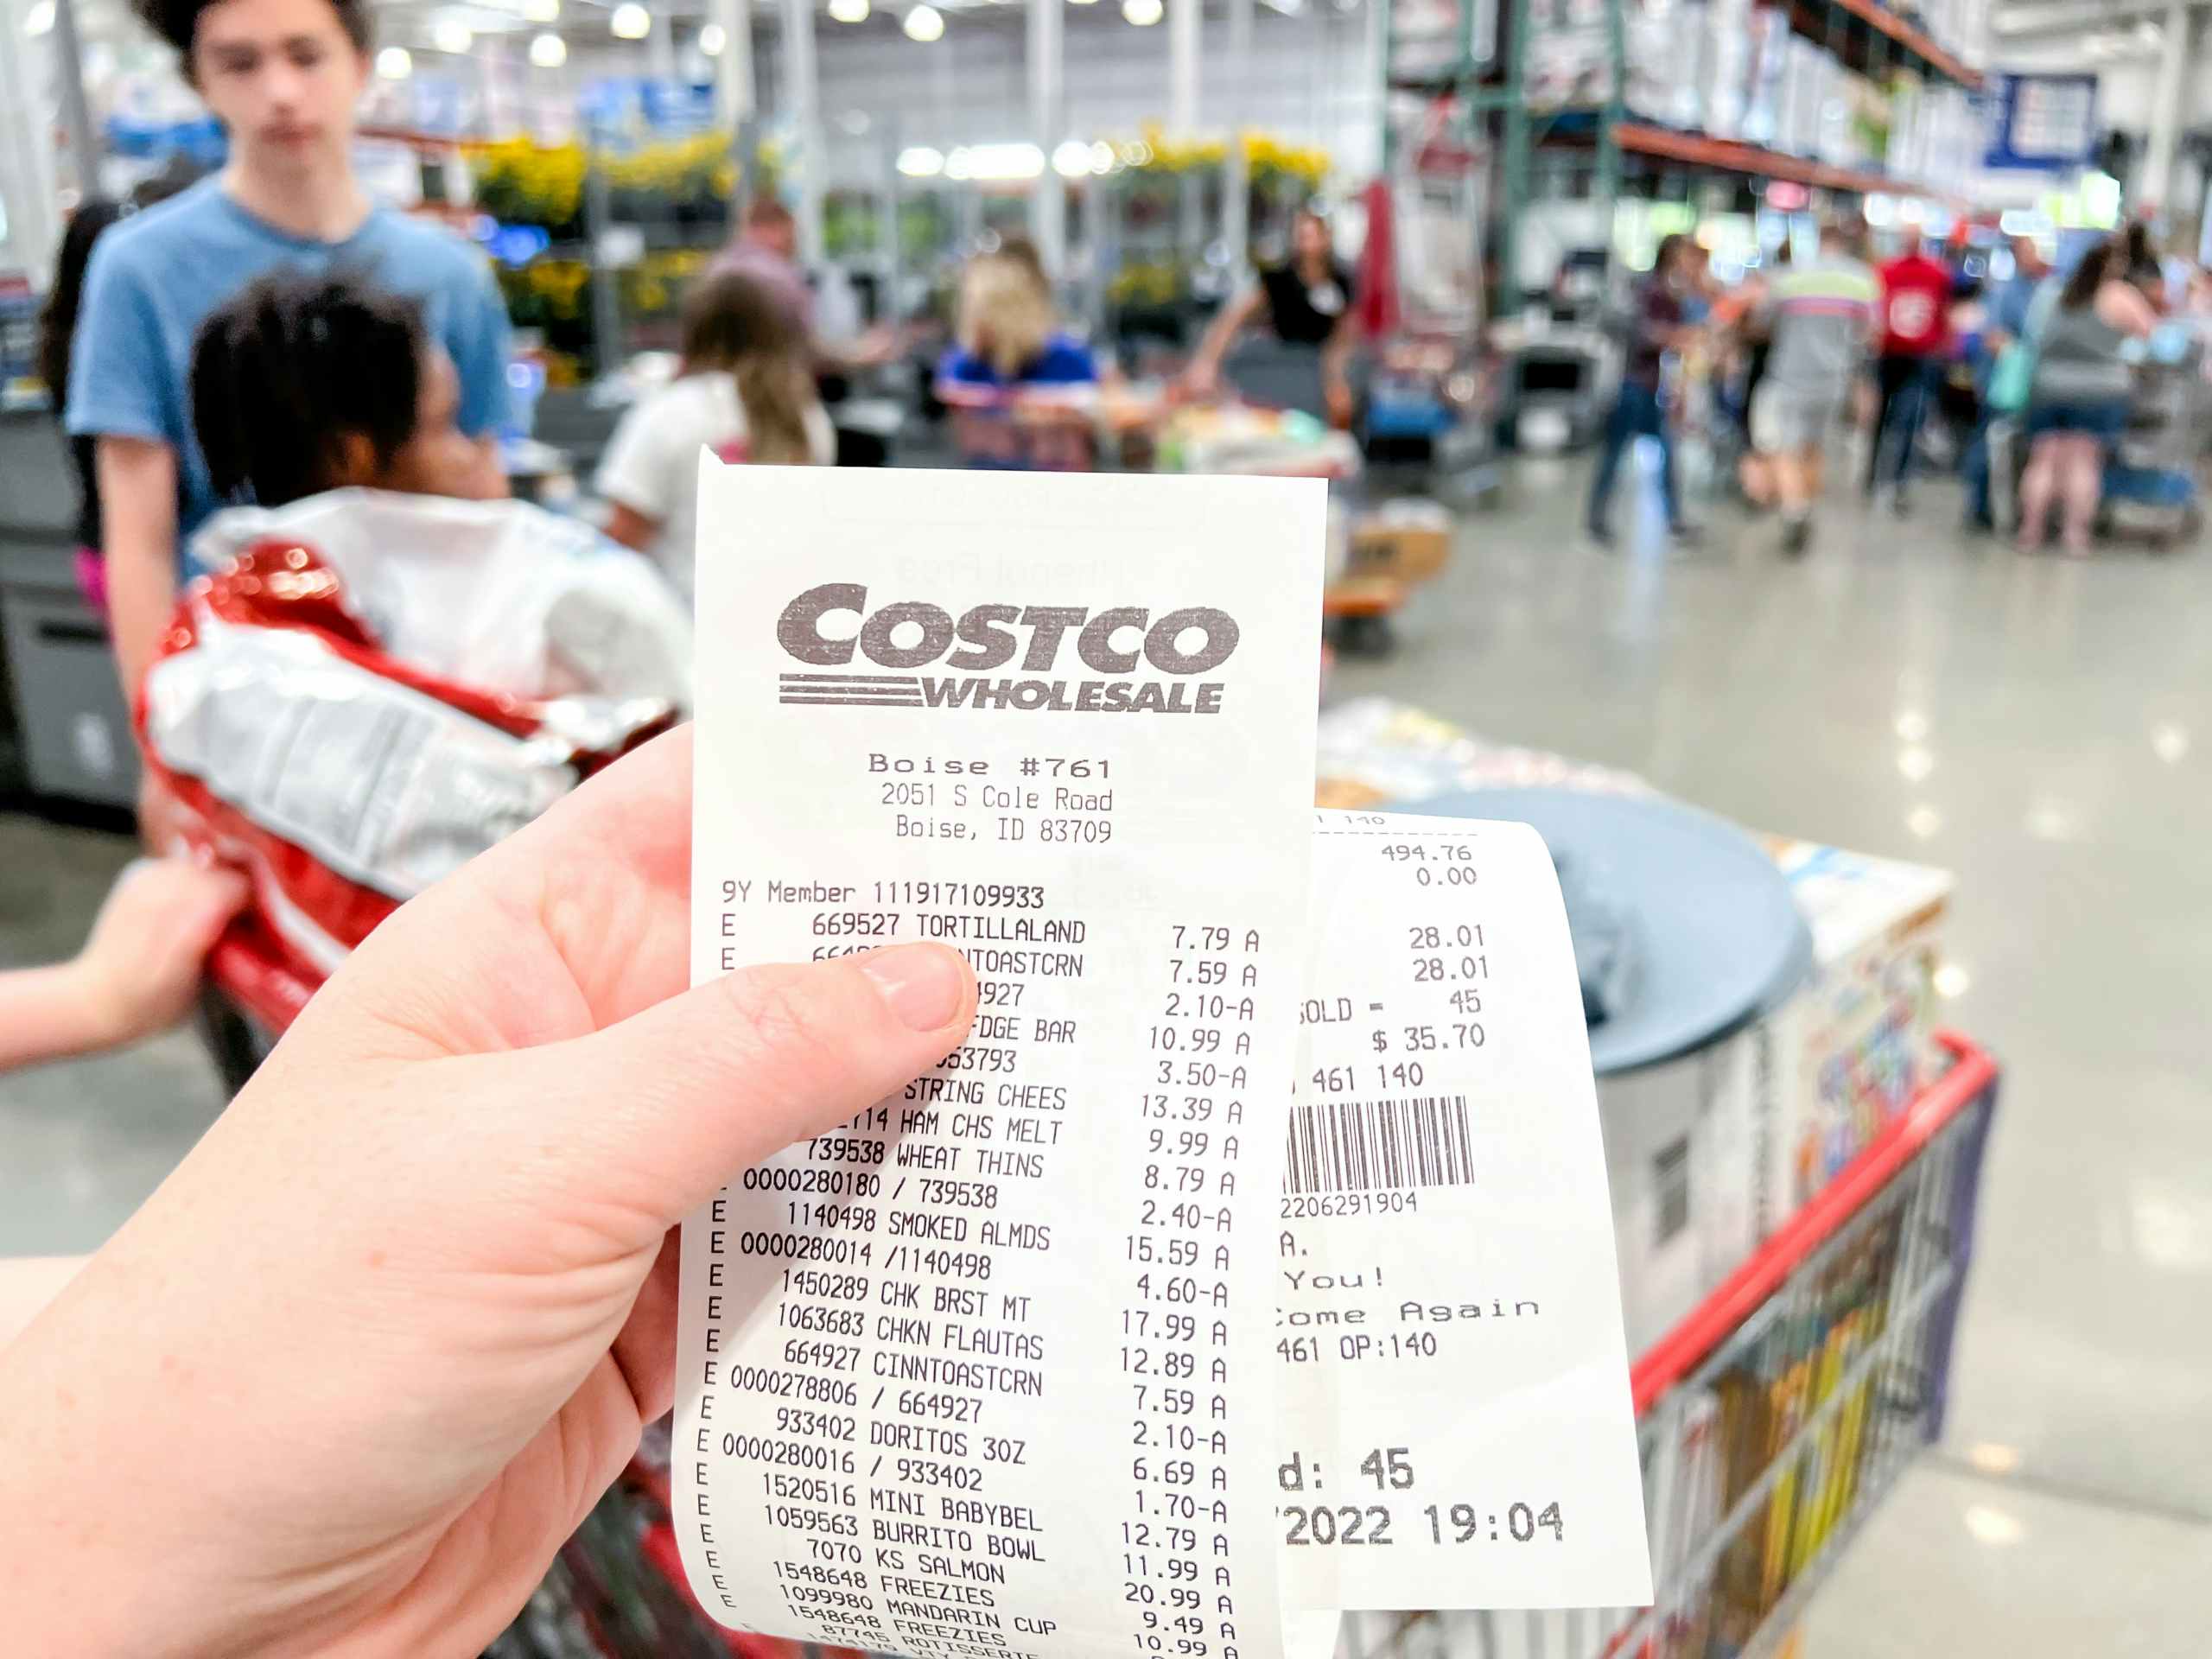 person's hand holding Costco receipt in store